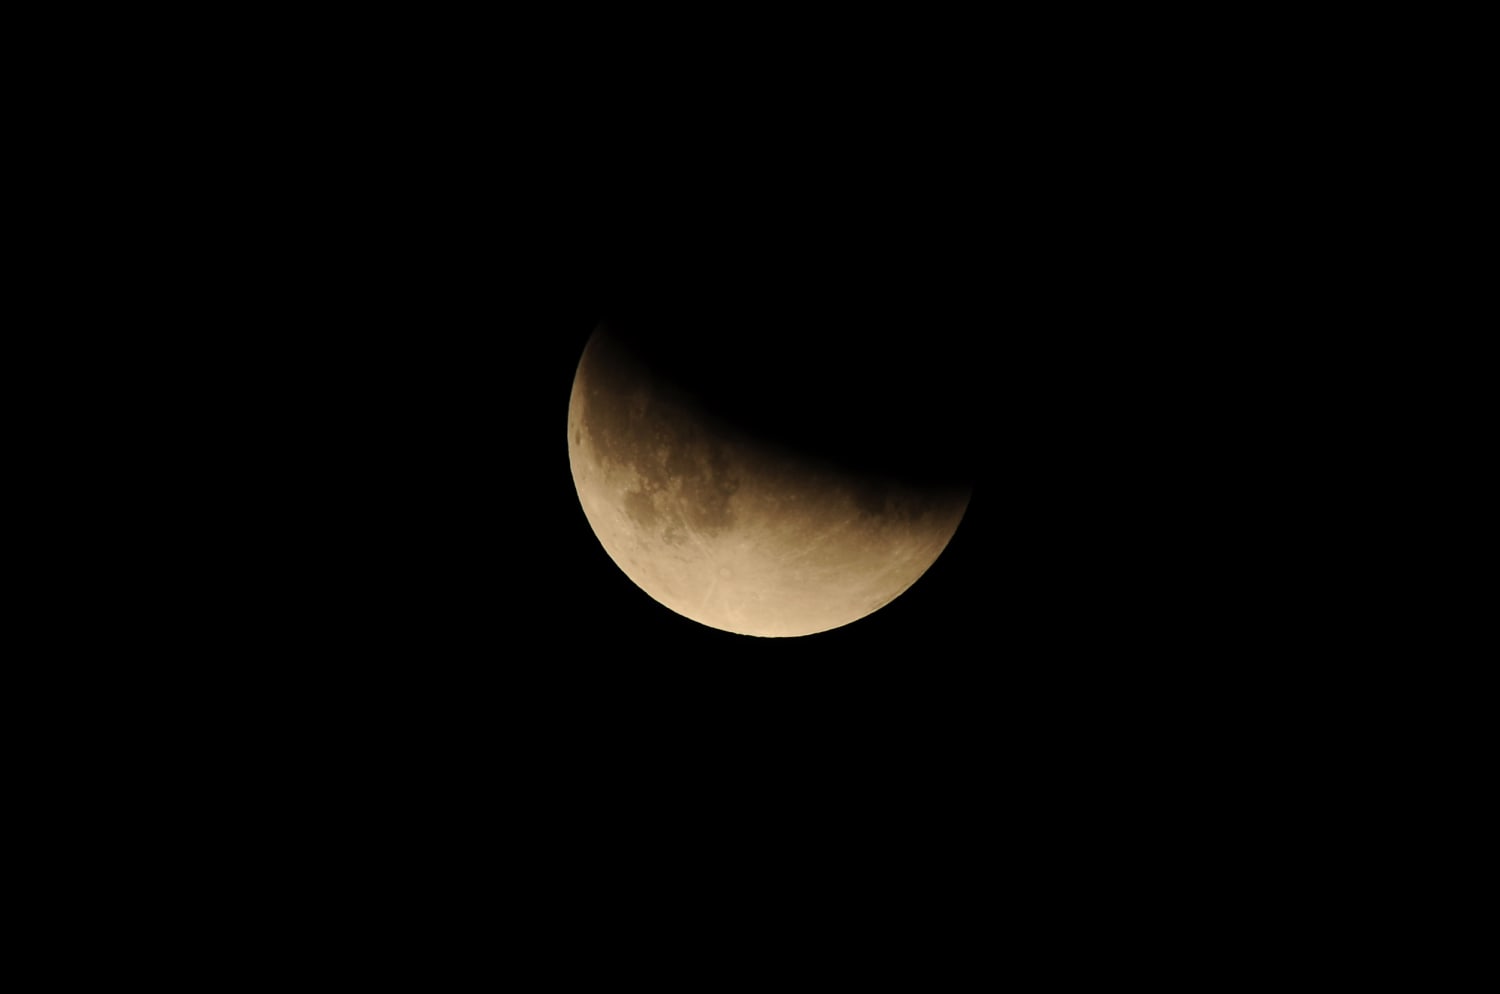 Partial lunar eclipse early Friday will be longest in 580 years